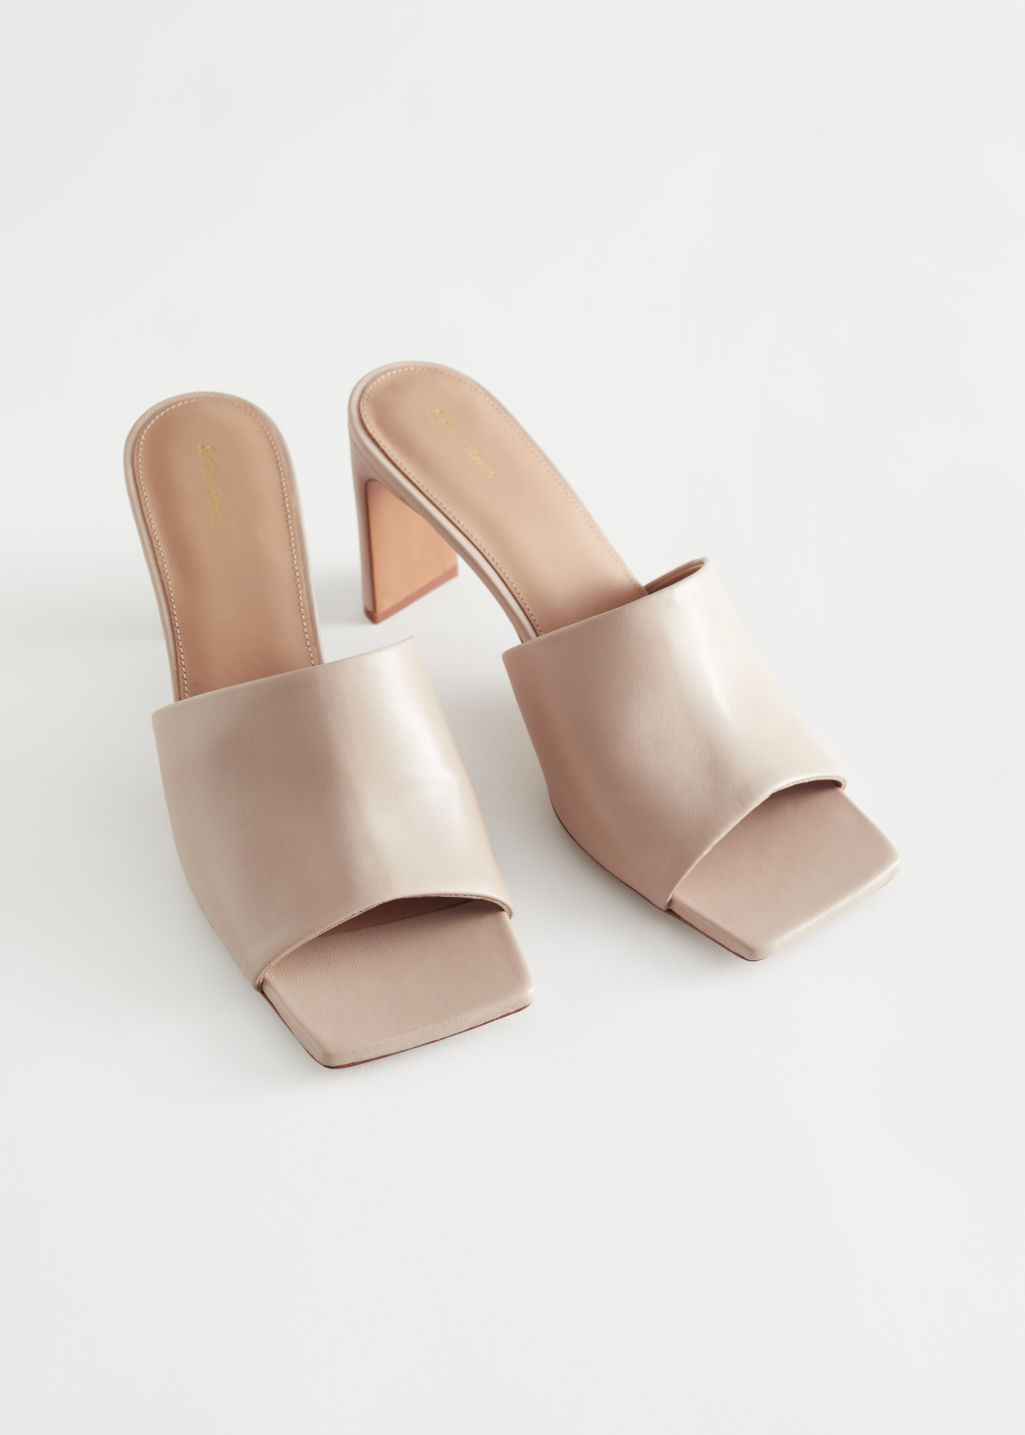 & Other Stories Heeled Leather Square Toe Sandals